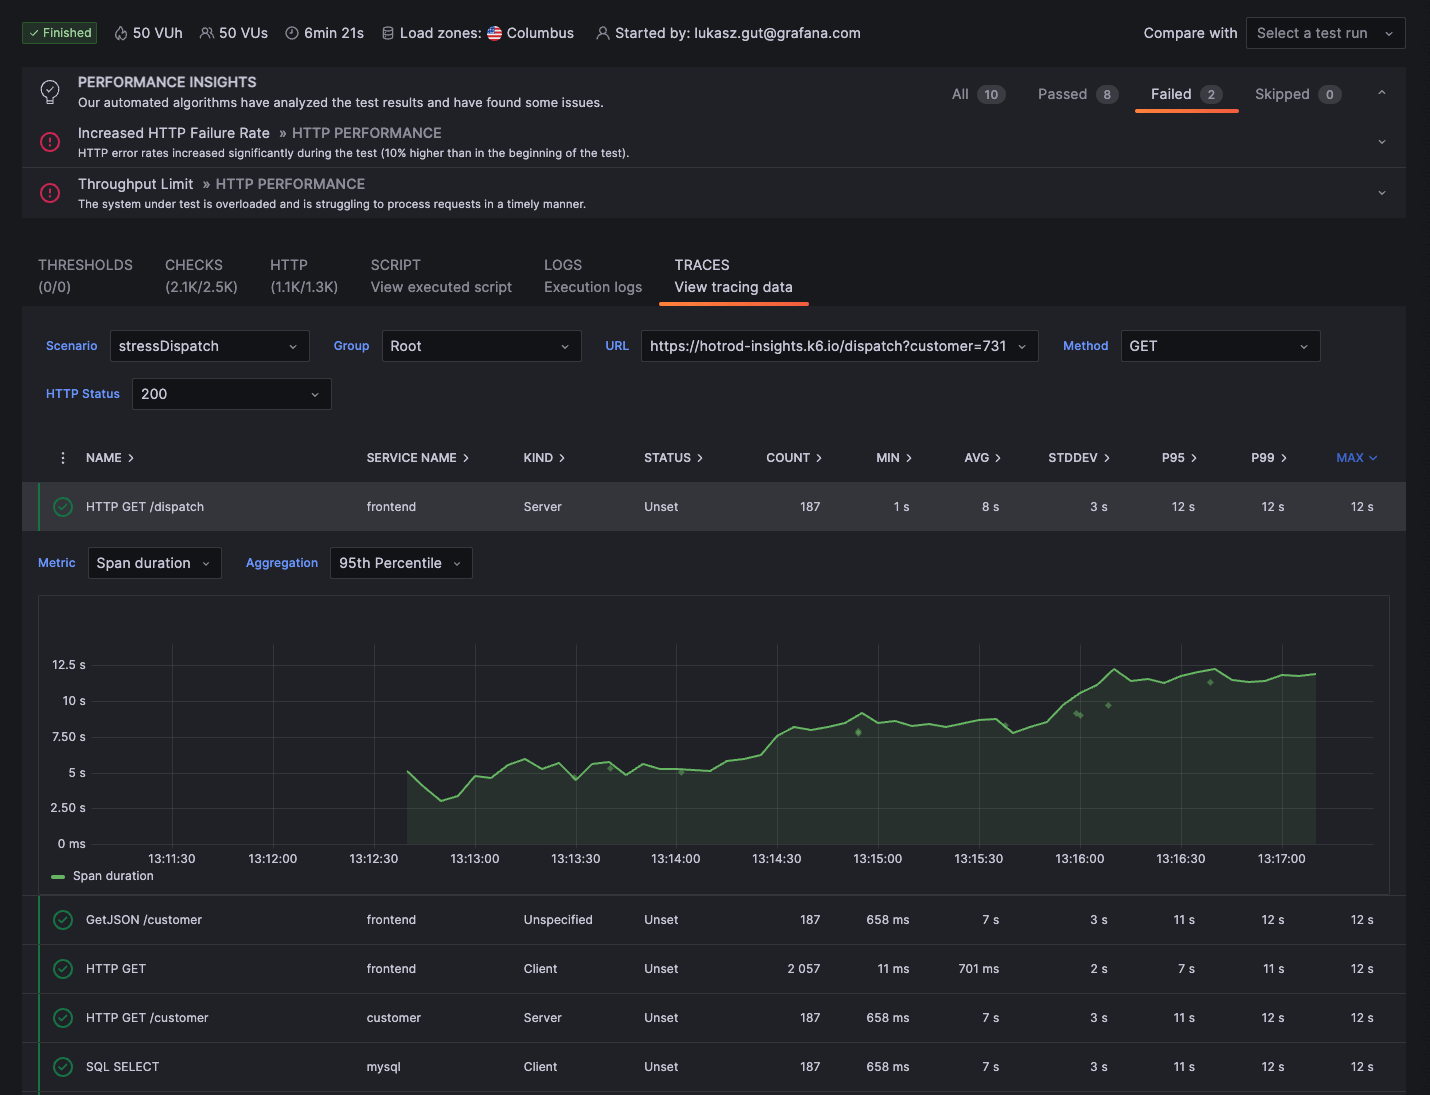 Grafana dashboard showing performance results with correlated metrics, logs, and traces